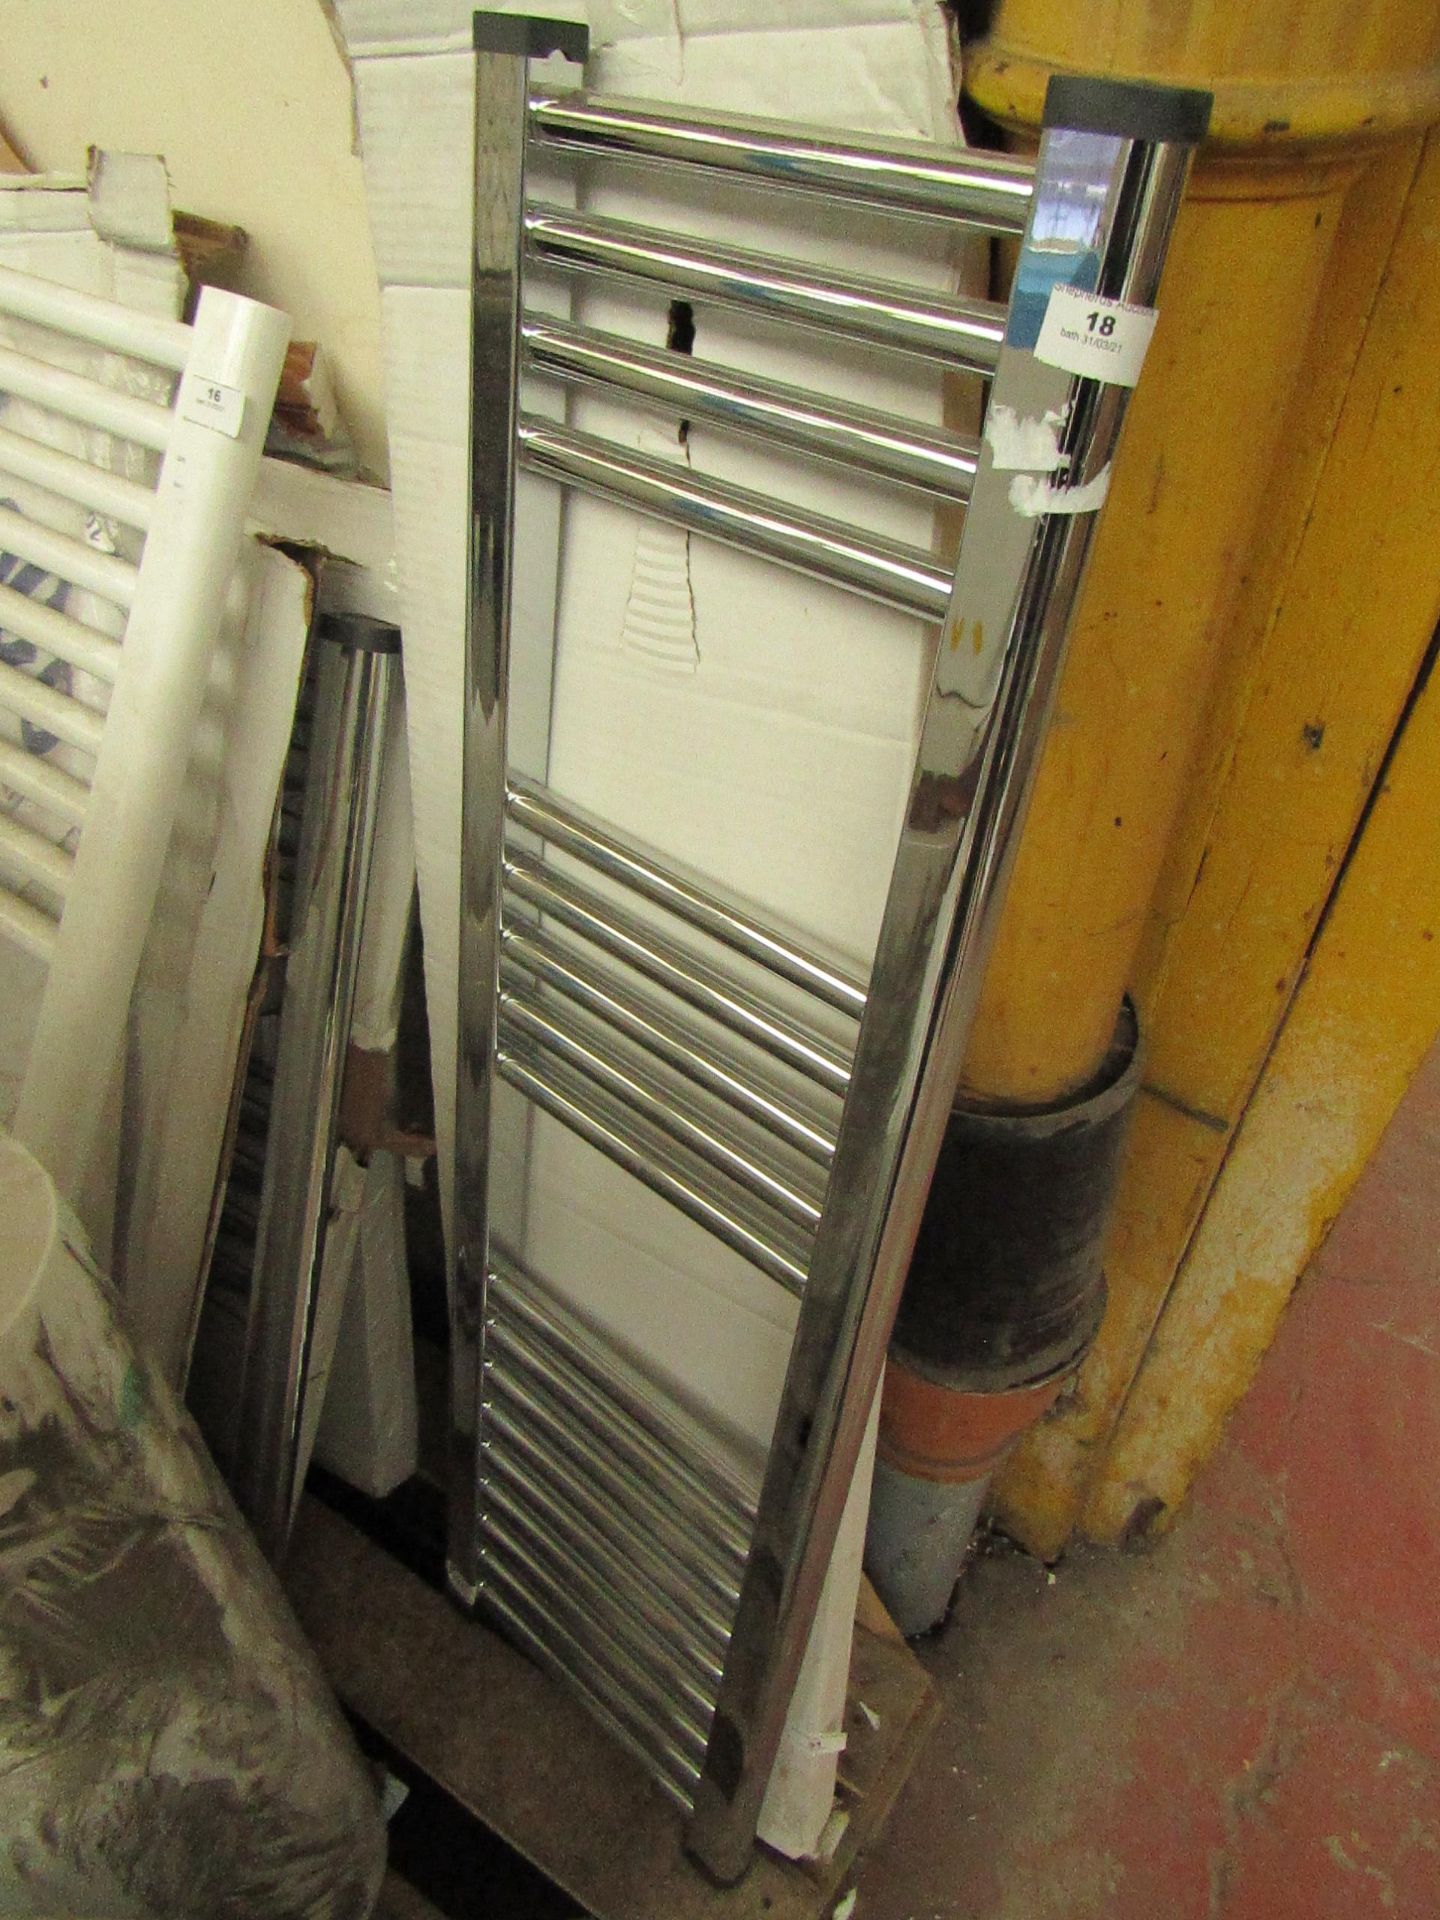 Loco straight towel rail 300 x 1000, ex-display. Please note, this lot may contain marks, missing